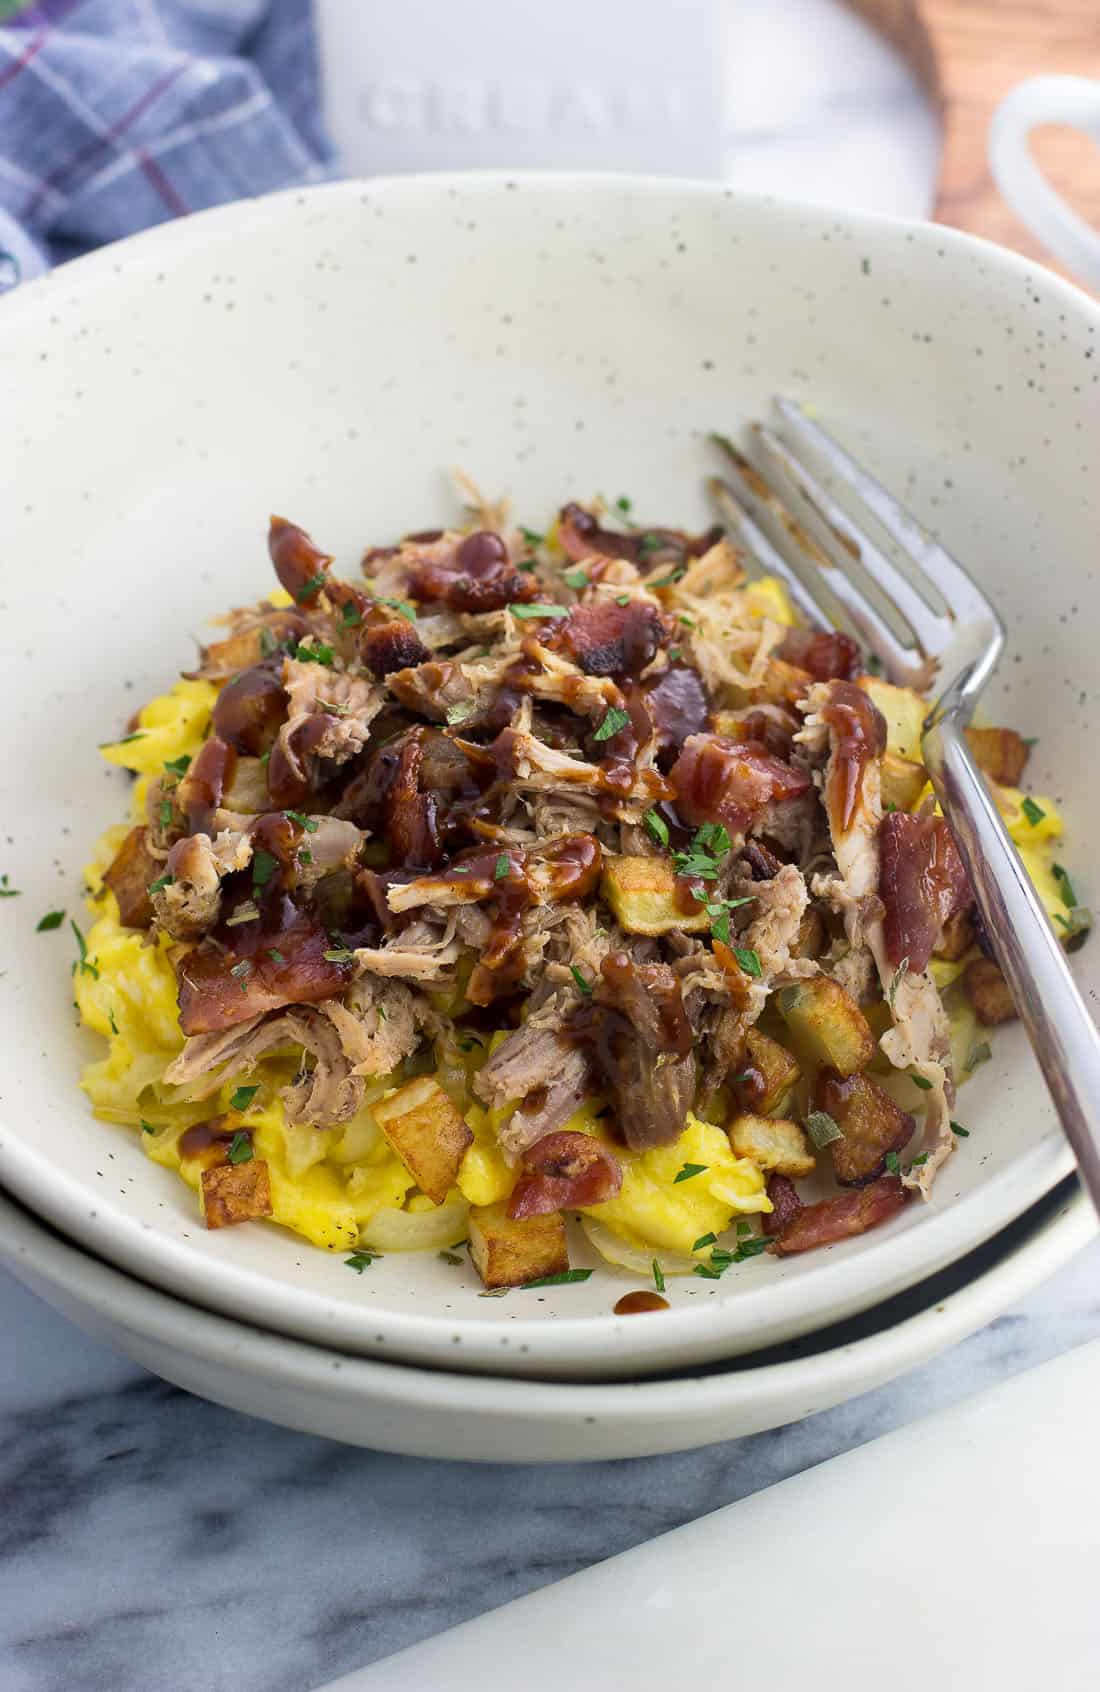 A pile of scrambled eggs, bacon, potatoes, pulled pork, and BBQ sauce in a bowl